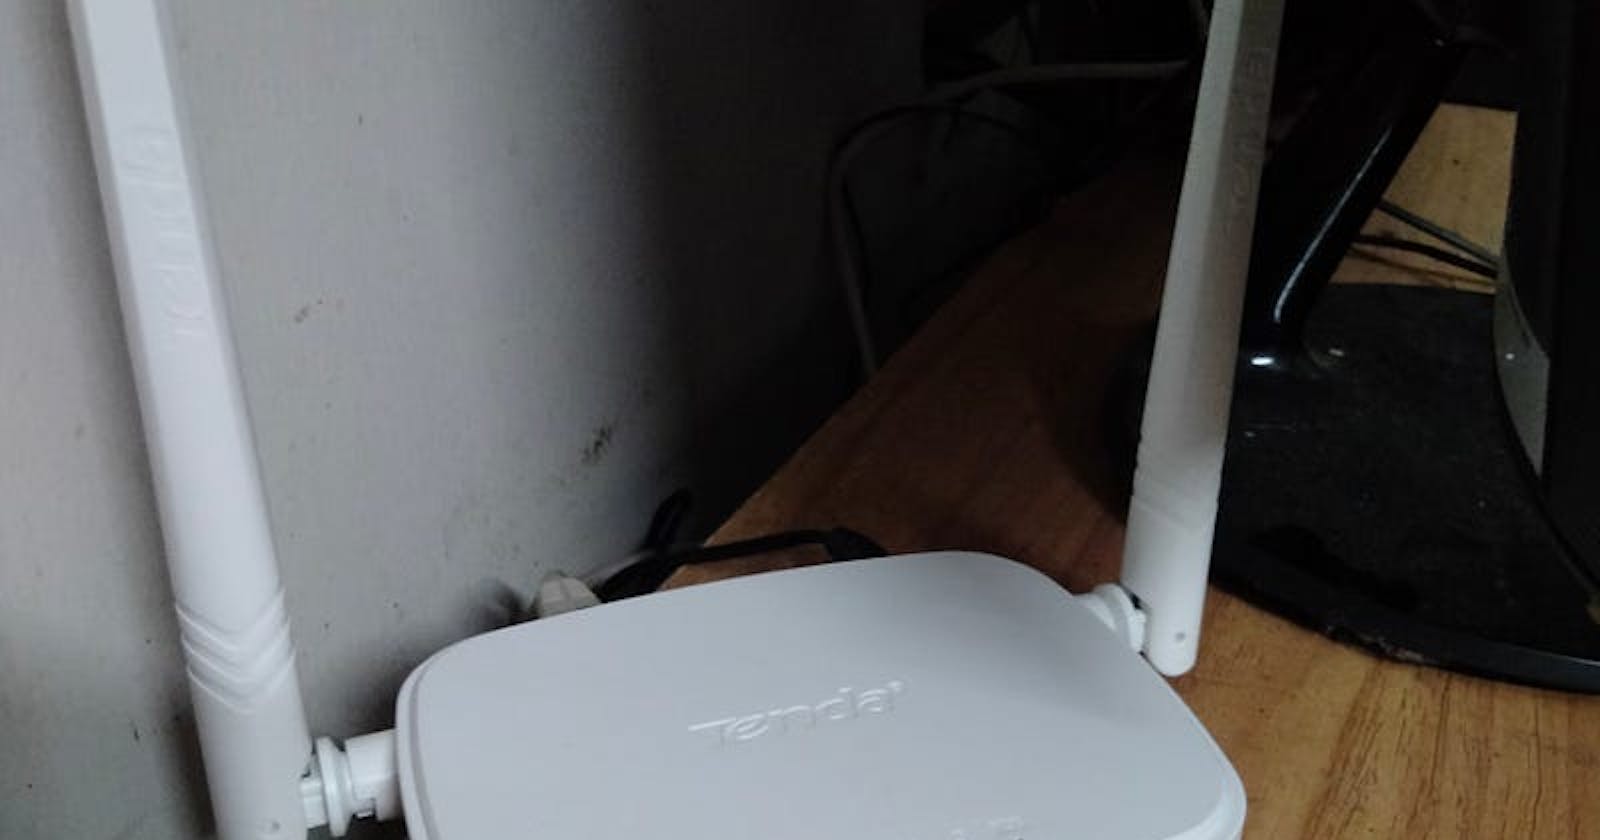 Wirelessly Connect Your Desktop Computer to the Internet Using a Cheap Tenda Router